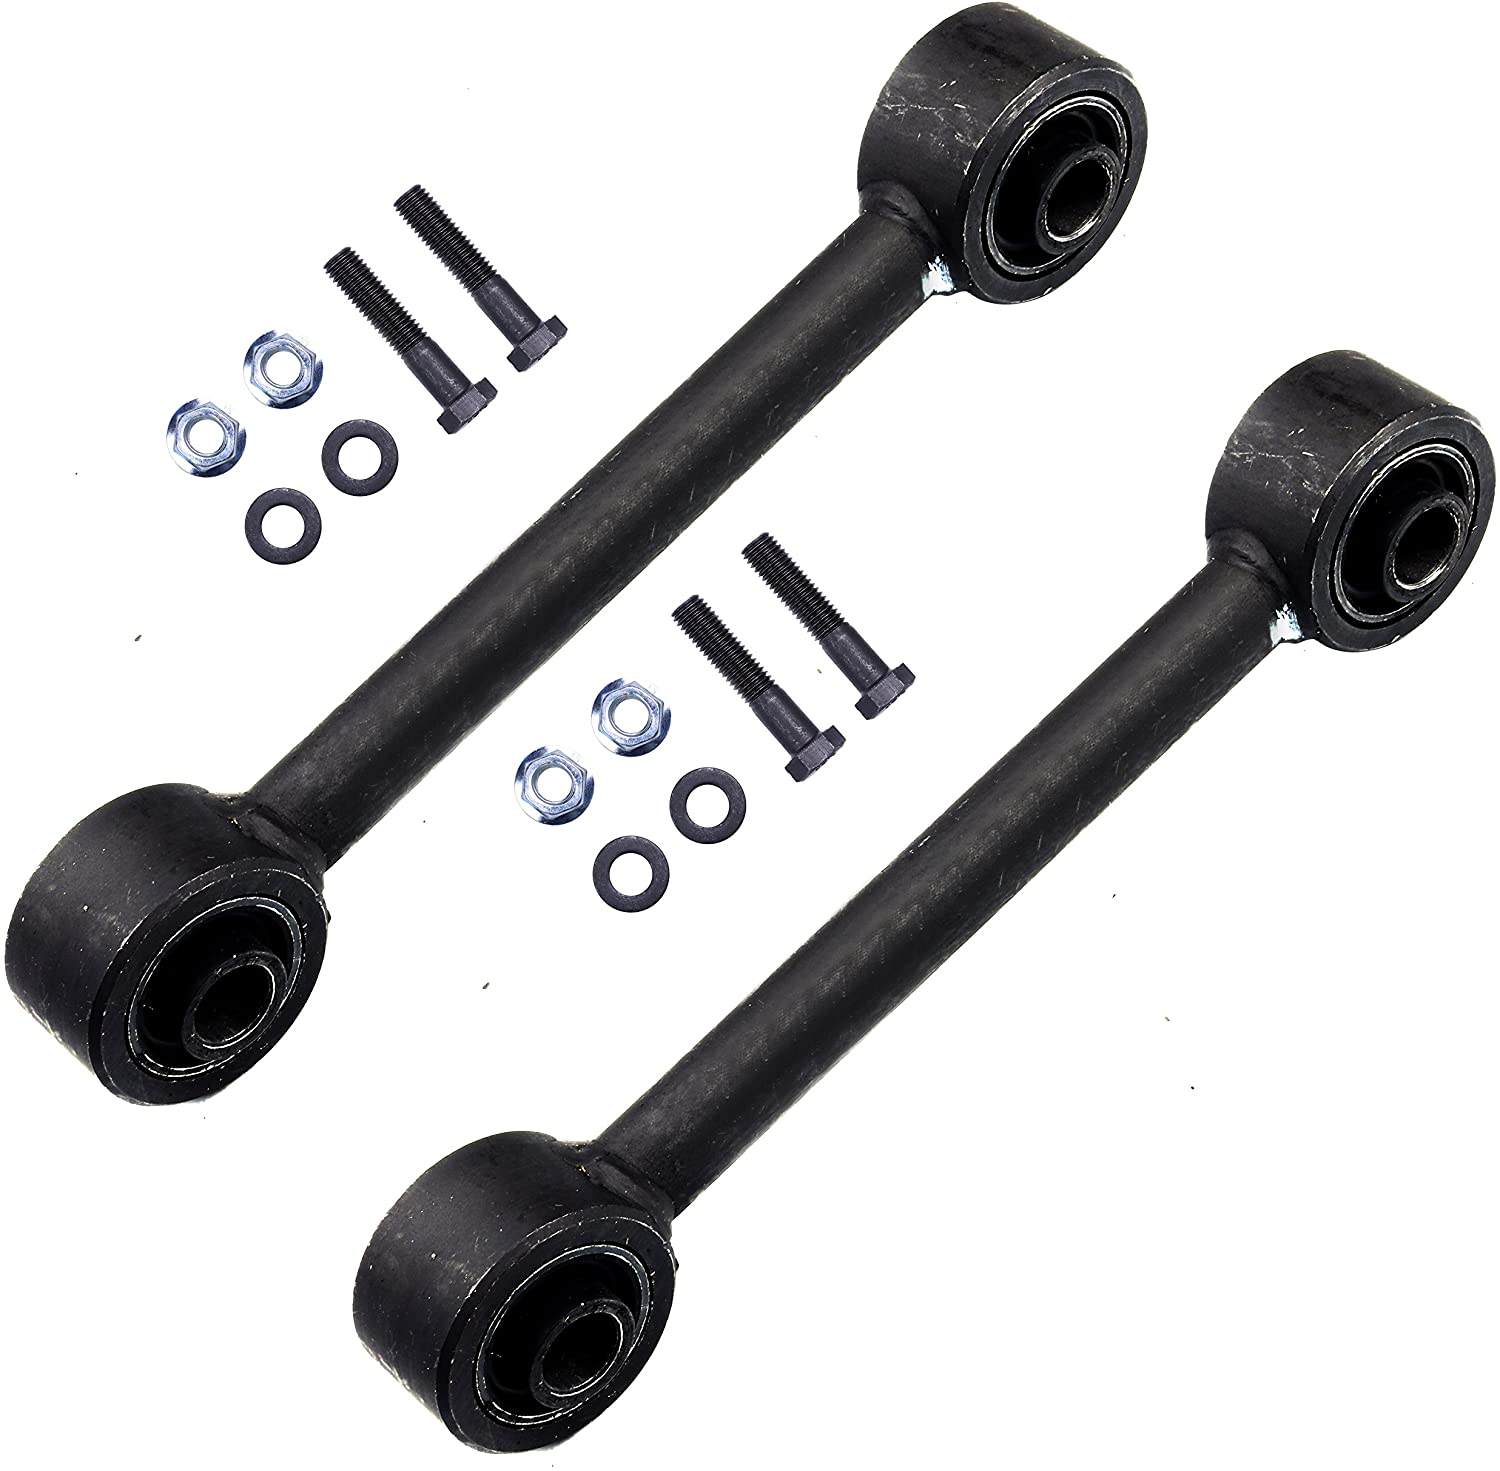 cciyu Front Stabilizer/Sway Bar End Links fit for 2000-2005 for Ford Excursion F-250 F-350 Super Duty 2pcs Suspension Kit